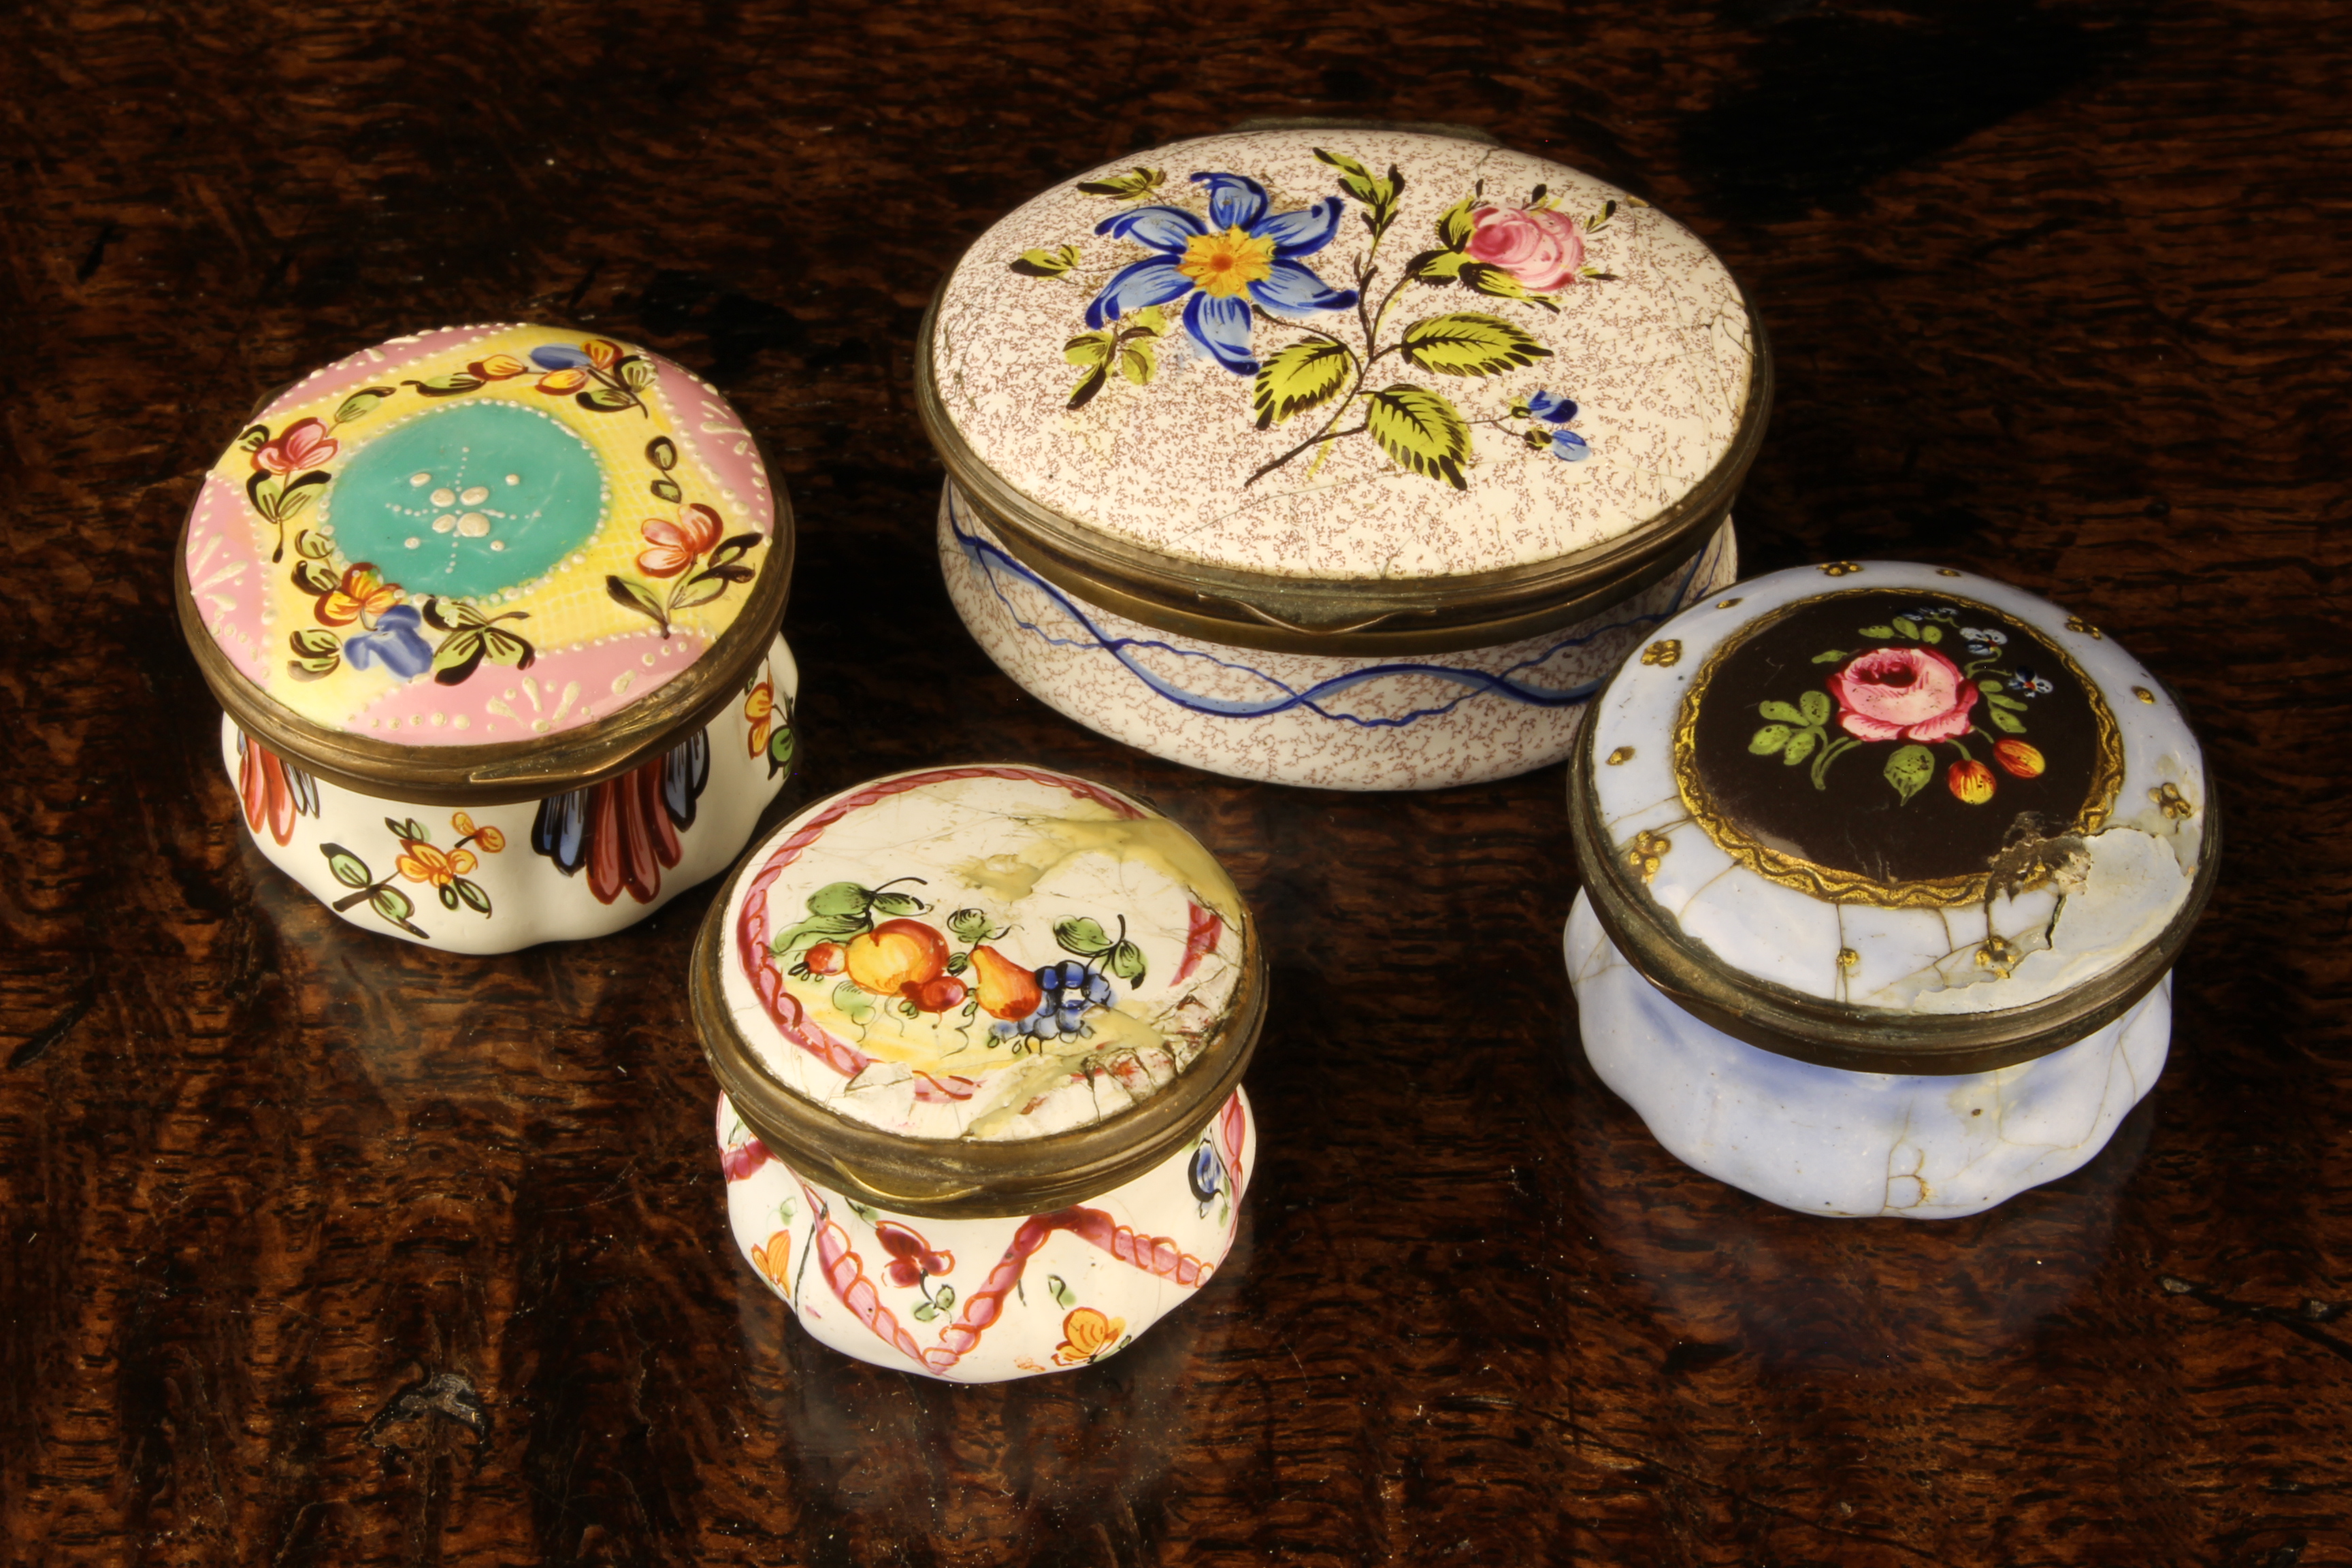 Four Bilston Enamel Patch Boxes decorated with flowers (A/F): One oval with a pink rose & blue